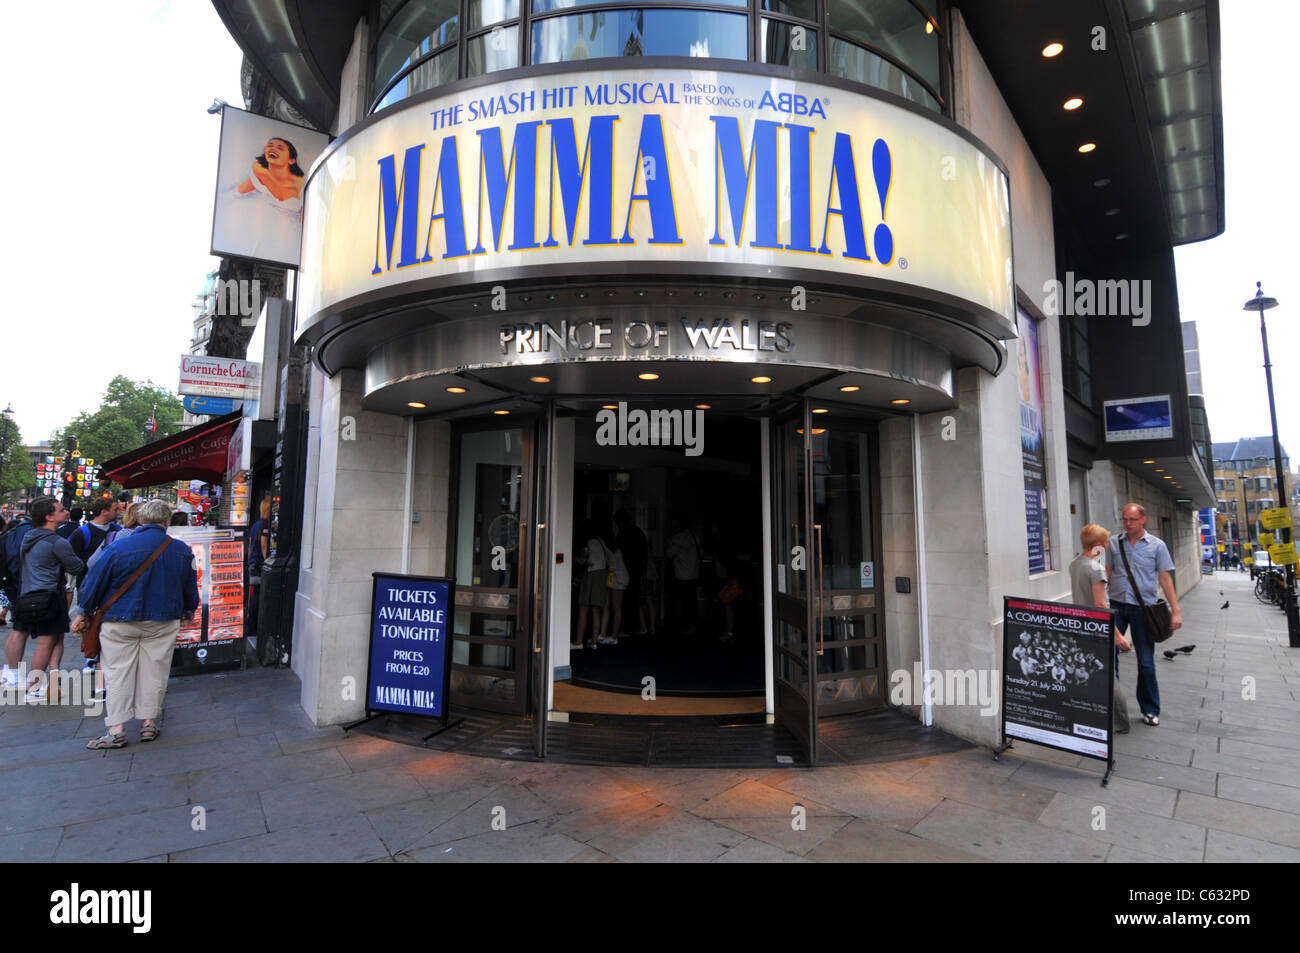 Prince of Wales Theatre, Mamma Mia !, Londres, Angleterre, Royaume-Uni Banque D'Images